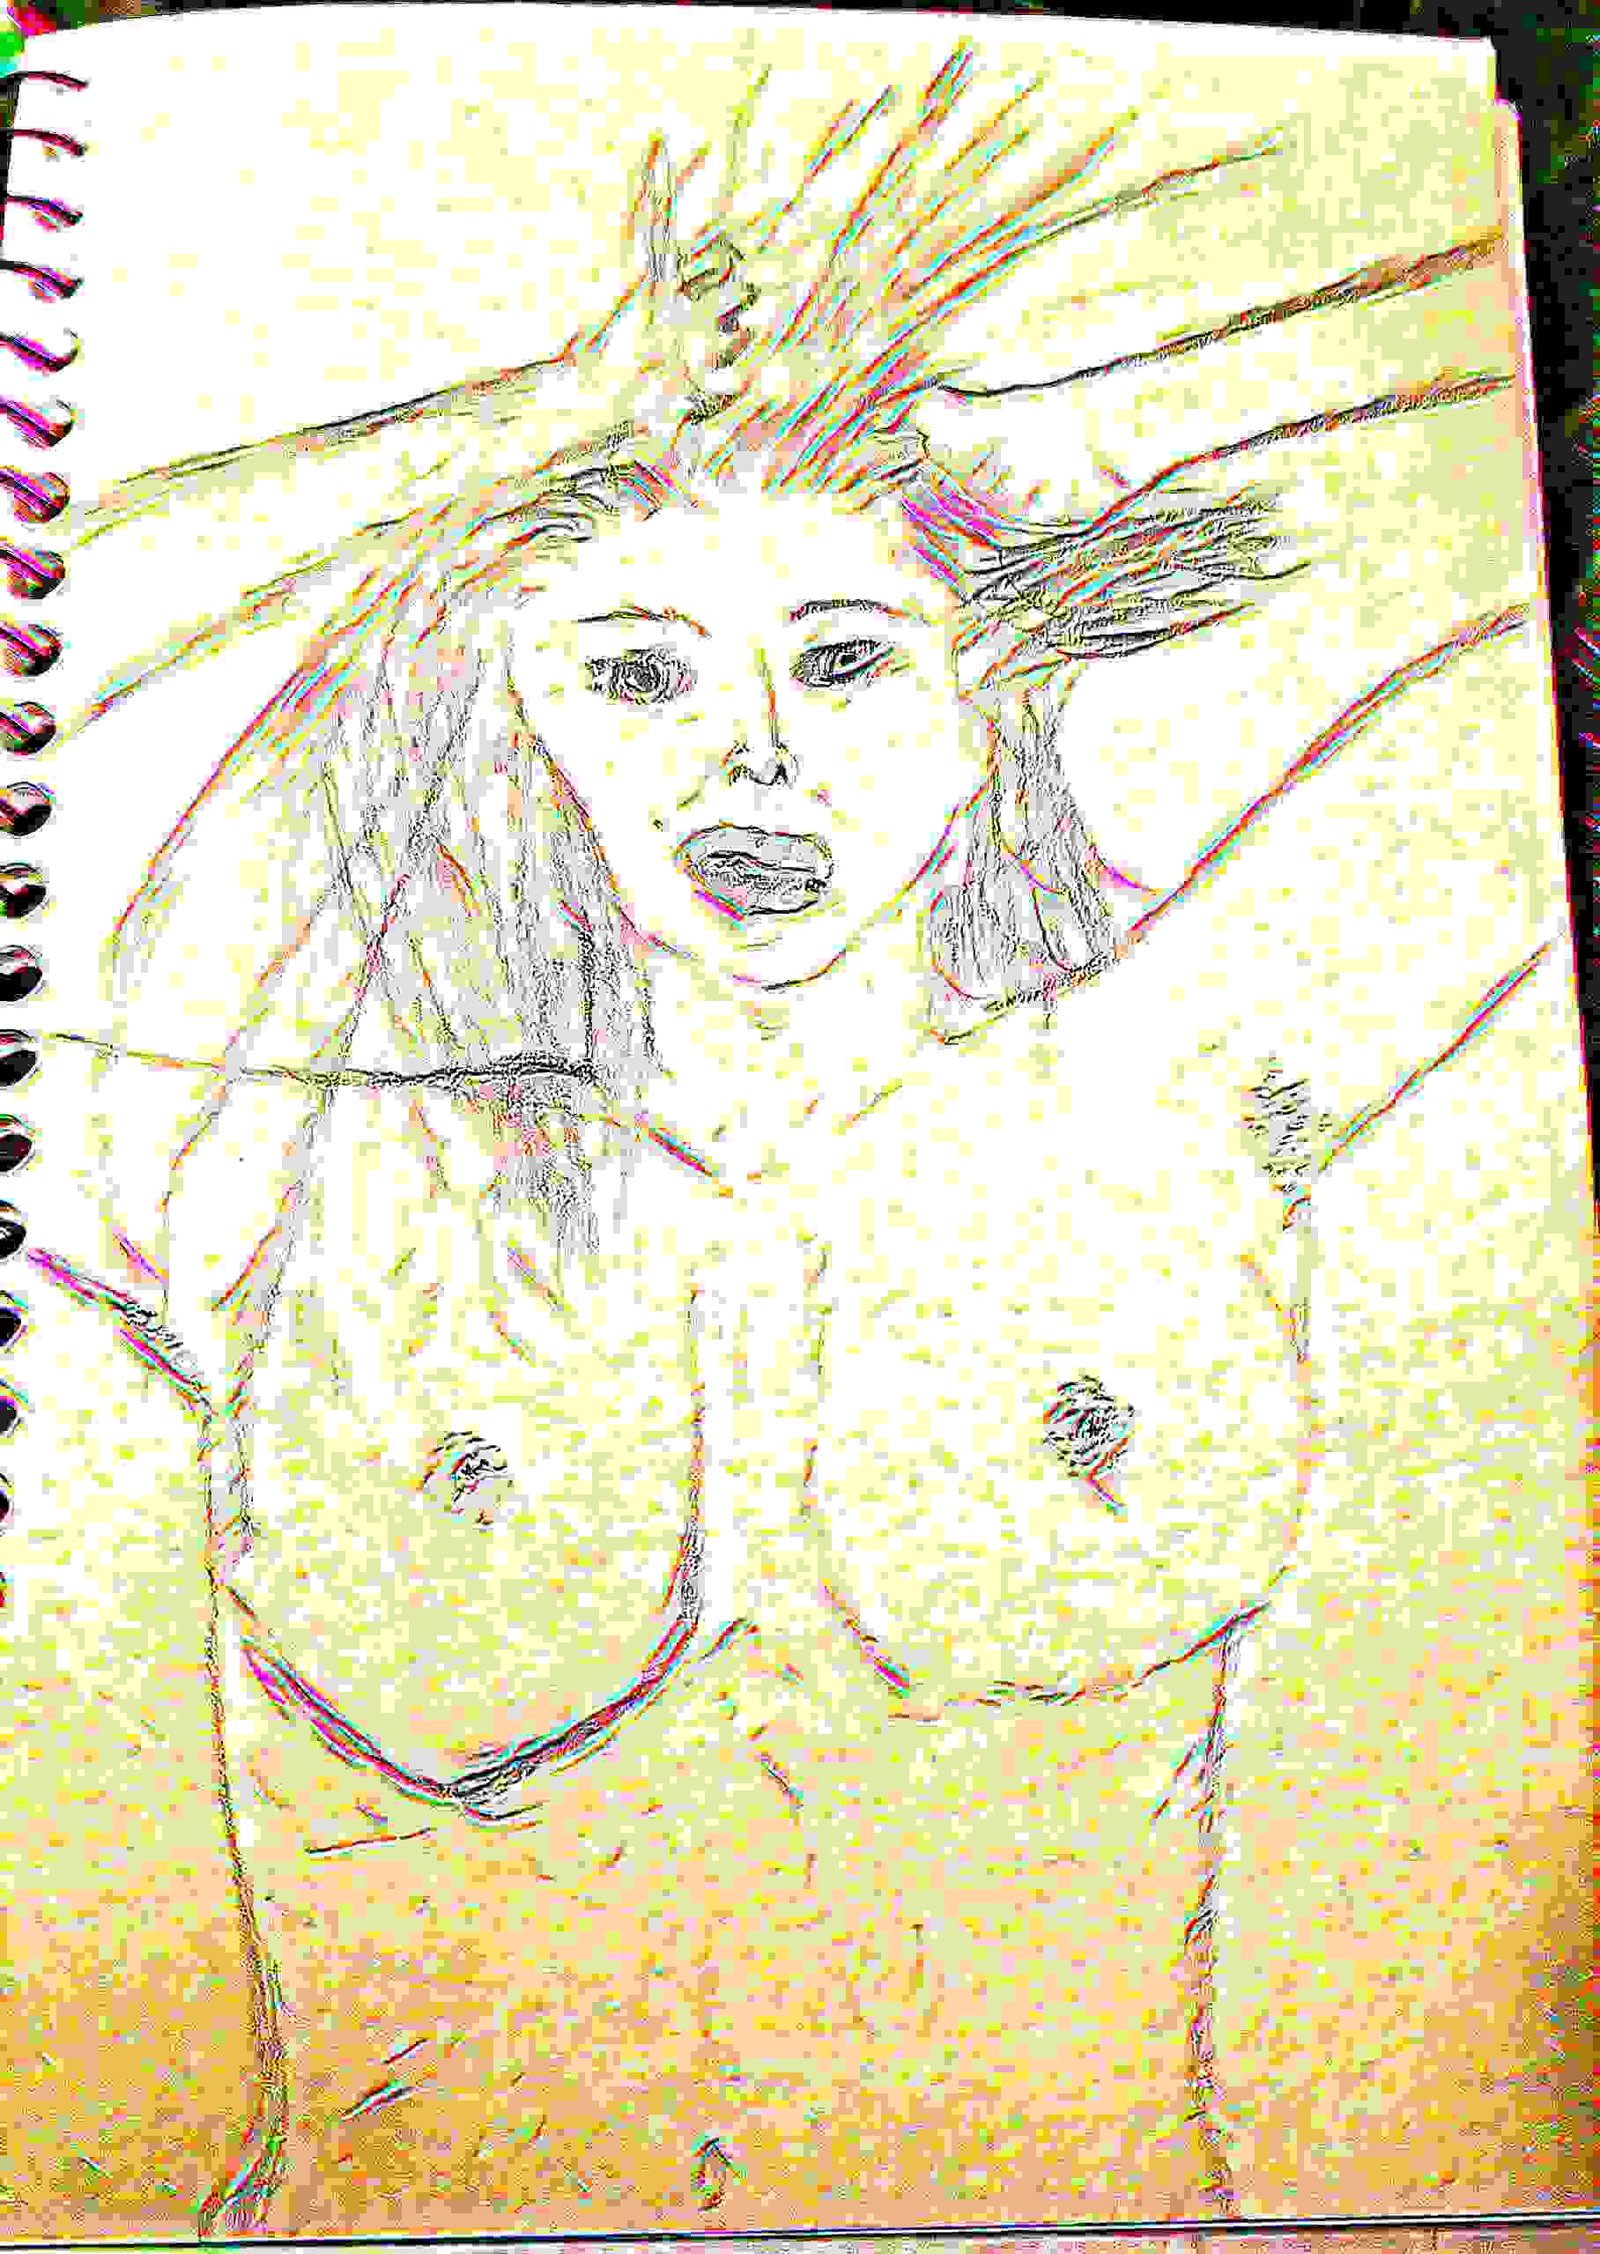 Painting Of Naked Woman In Drawn And Digitally Rendered